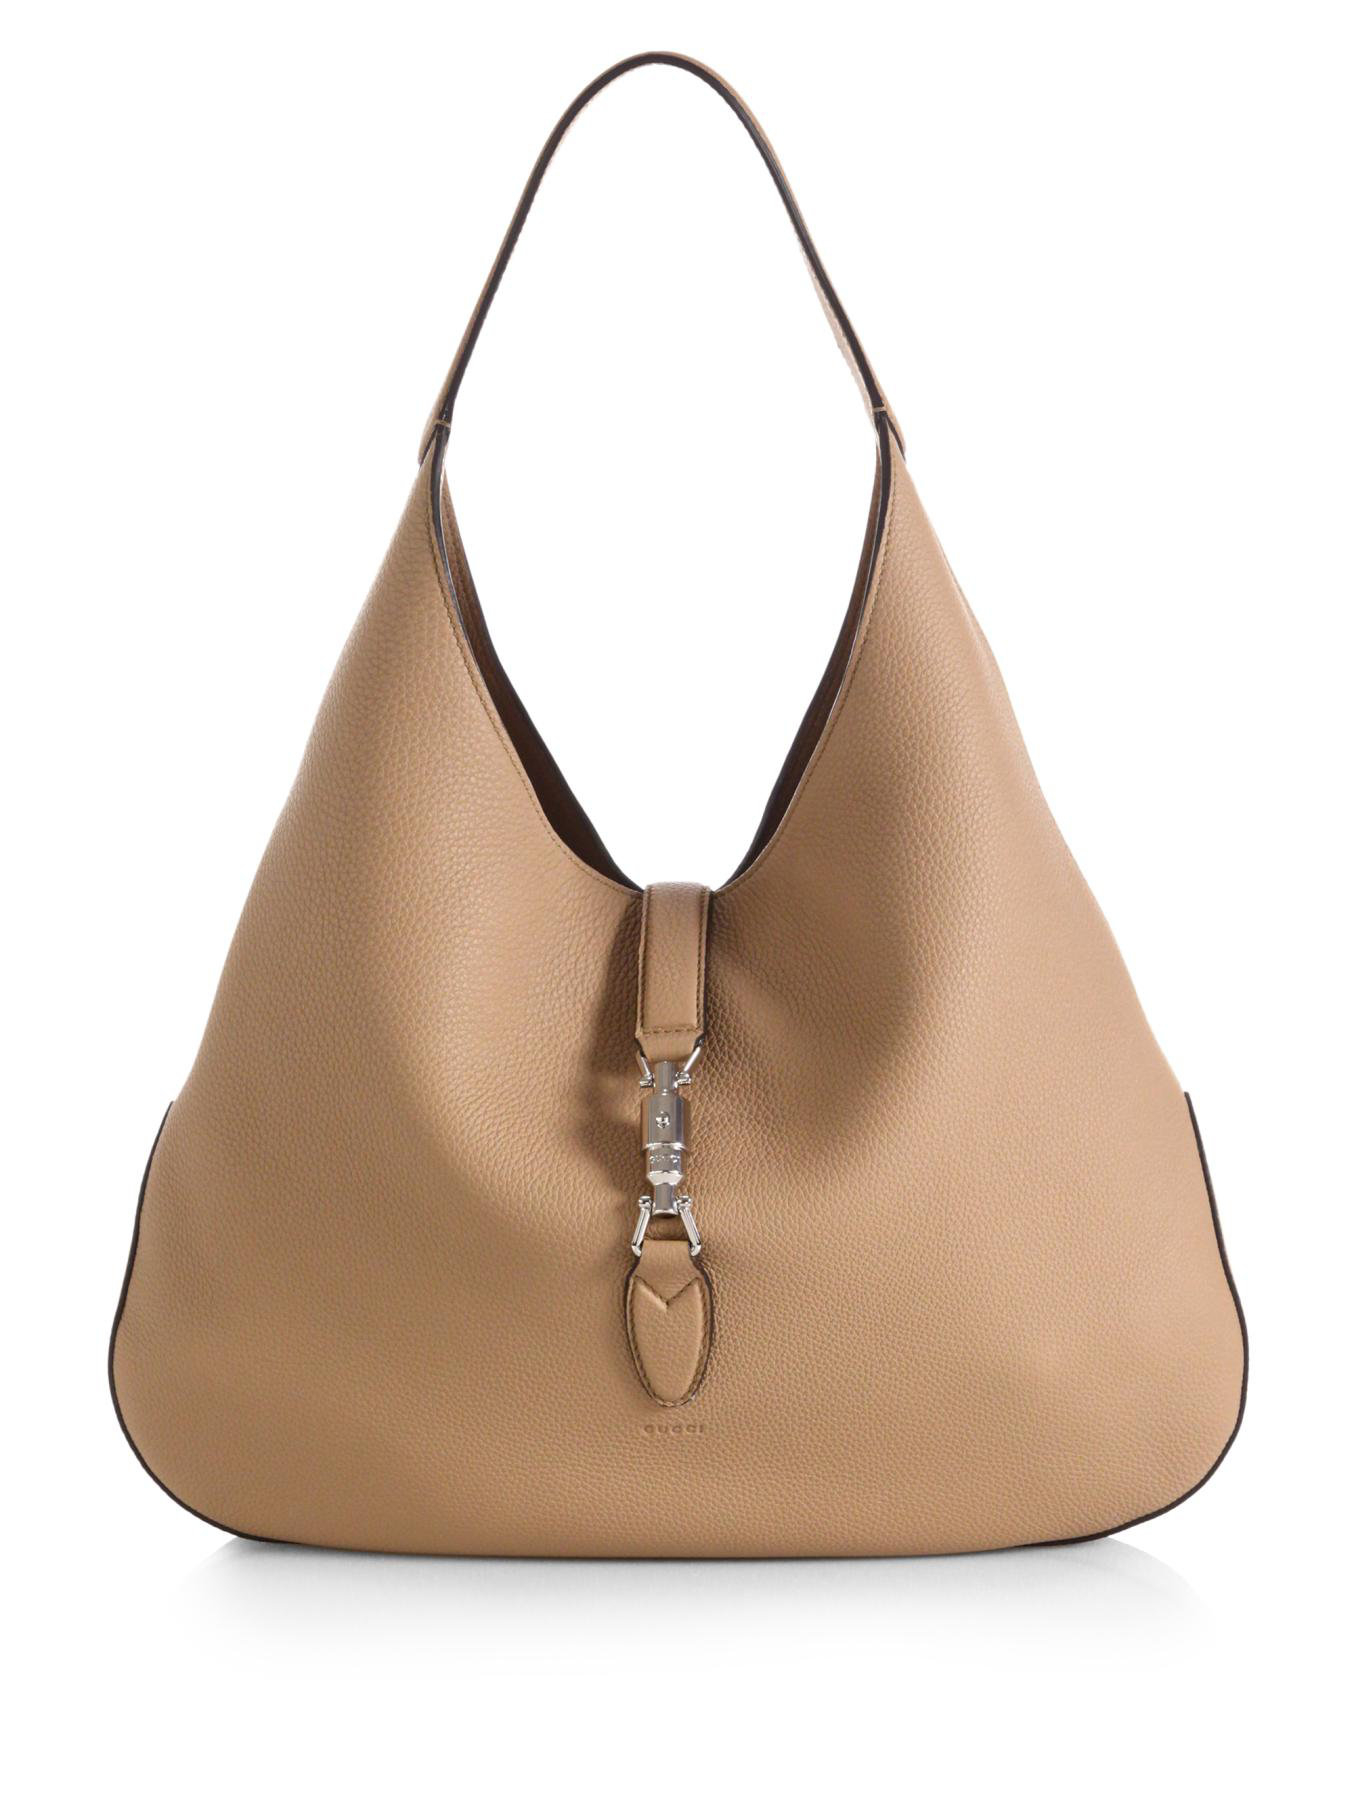 Lyst - Gucci Jackie Soft Leather Hobo Bag in Brown